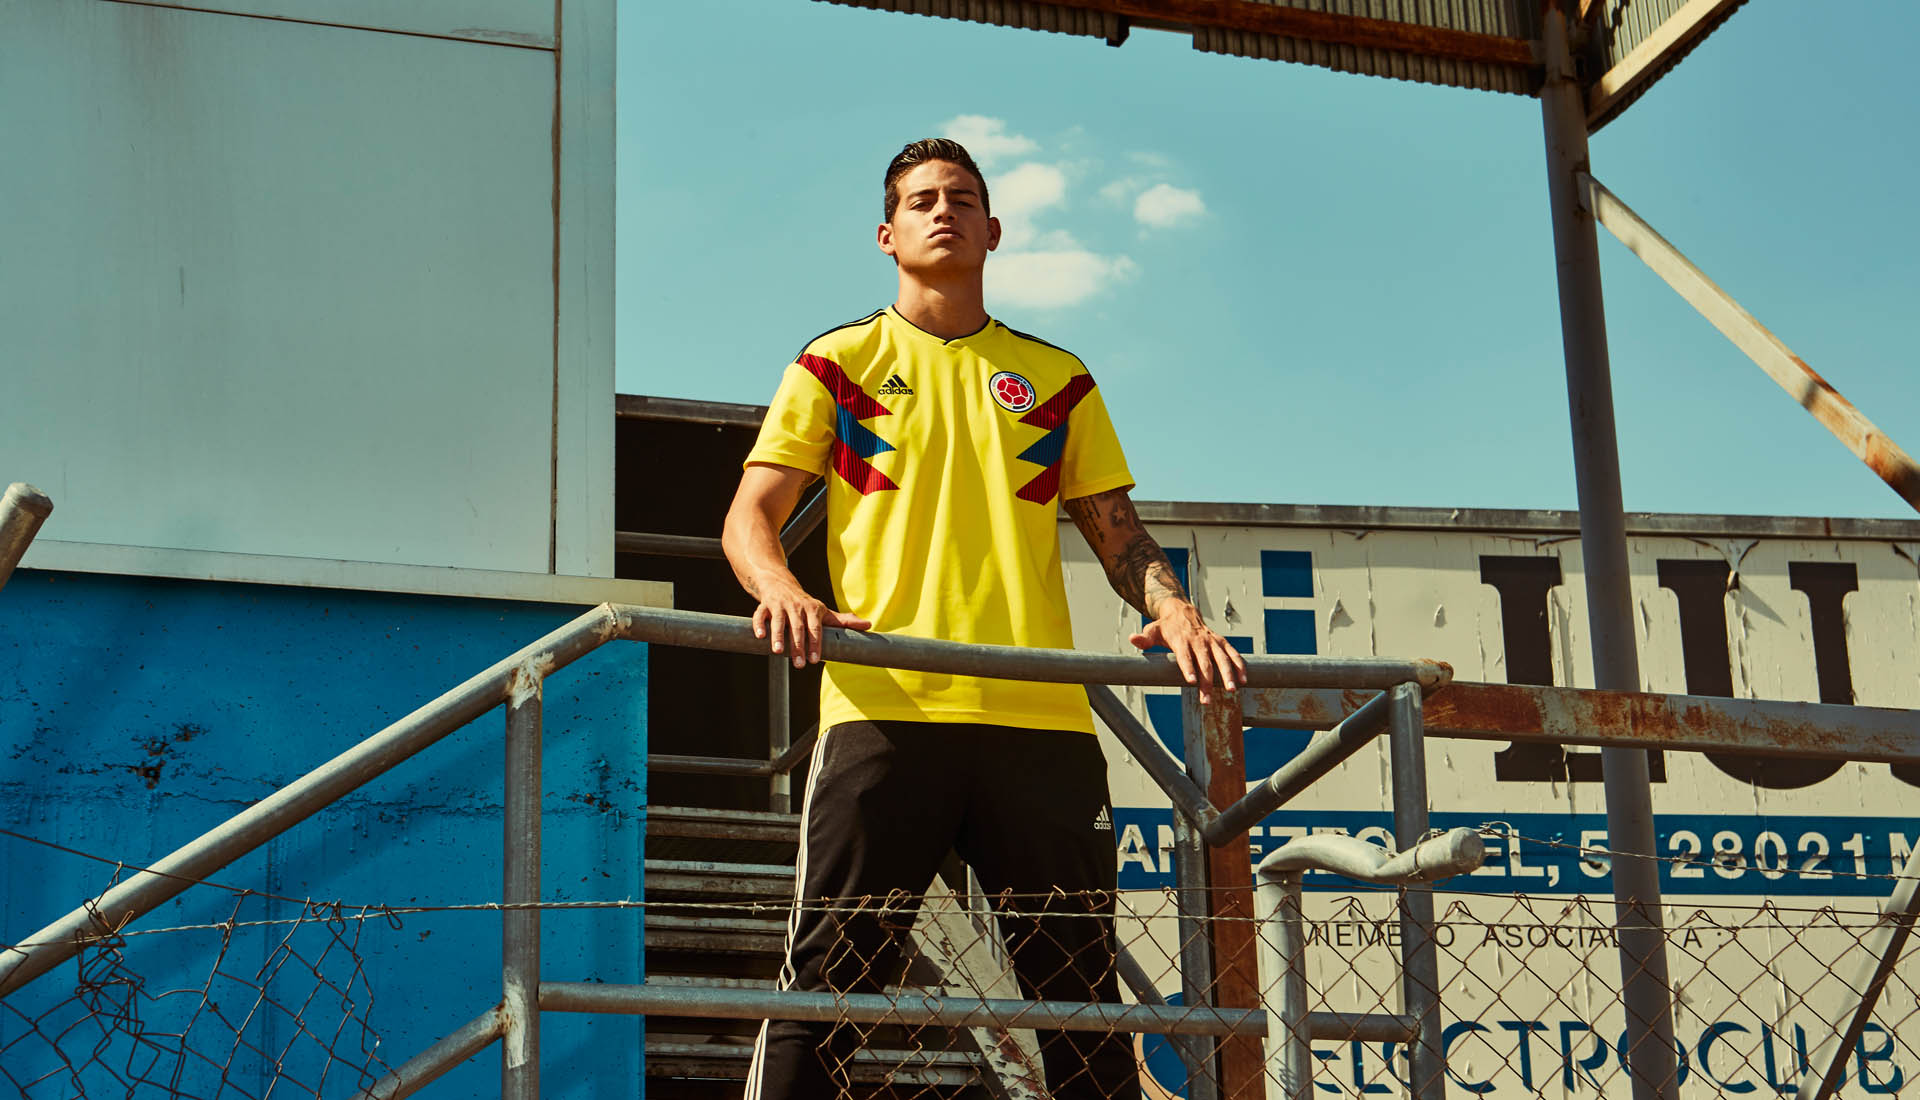 Colombia World Cup Shirt 2018 adidas SoccerBible_0004_JAMES_12774.jpg